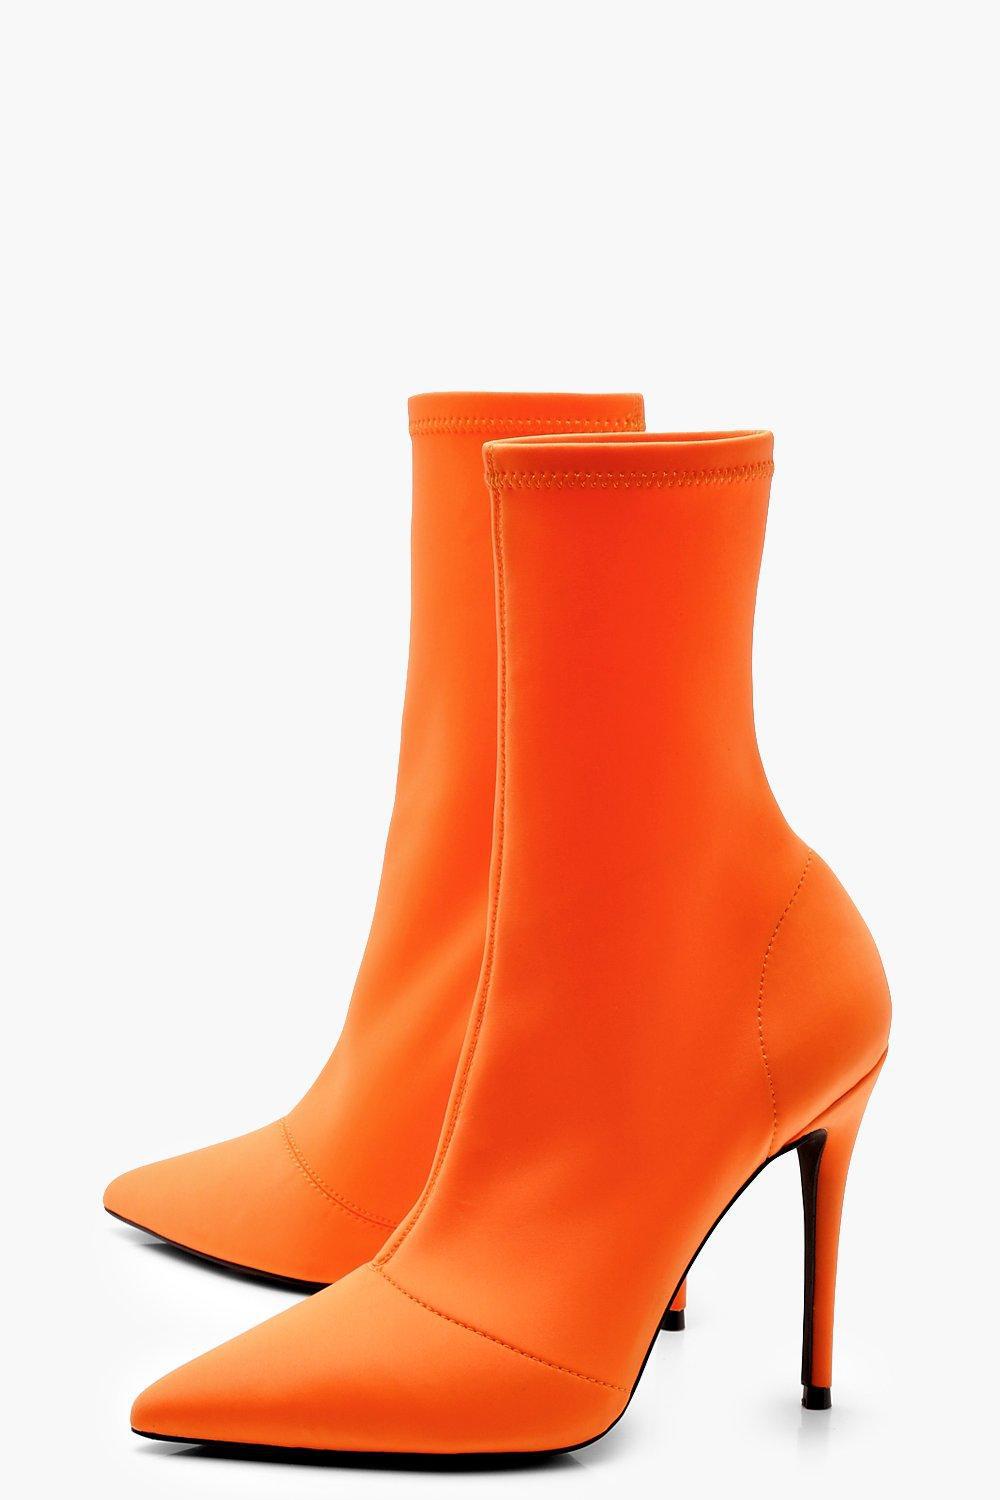 Boohoo Stretch Pointed Toe Sock Boots in Orange | Lyst